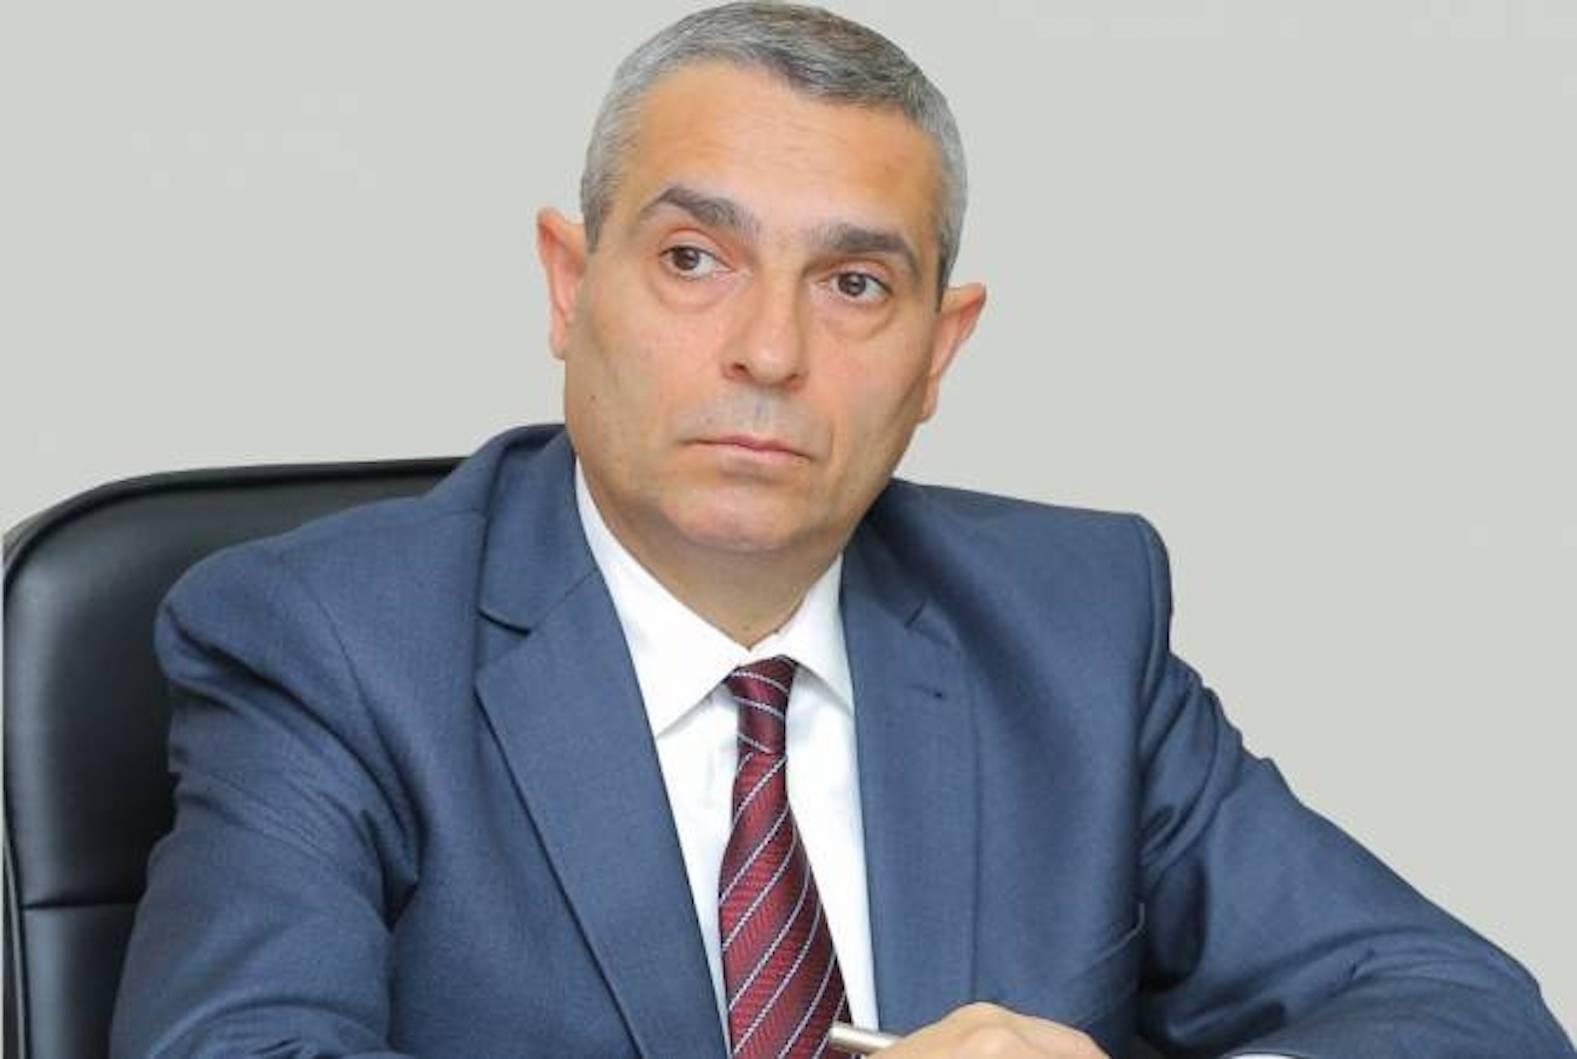 Artsakh Foreign Minister Masis Mailyan “Relieved of Post”